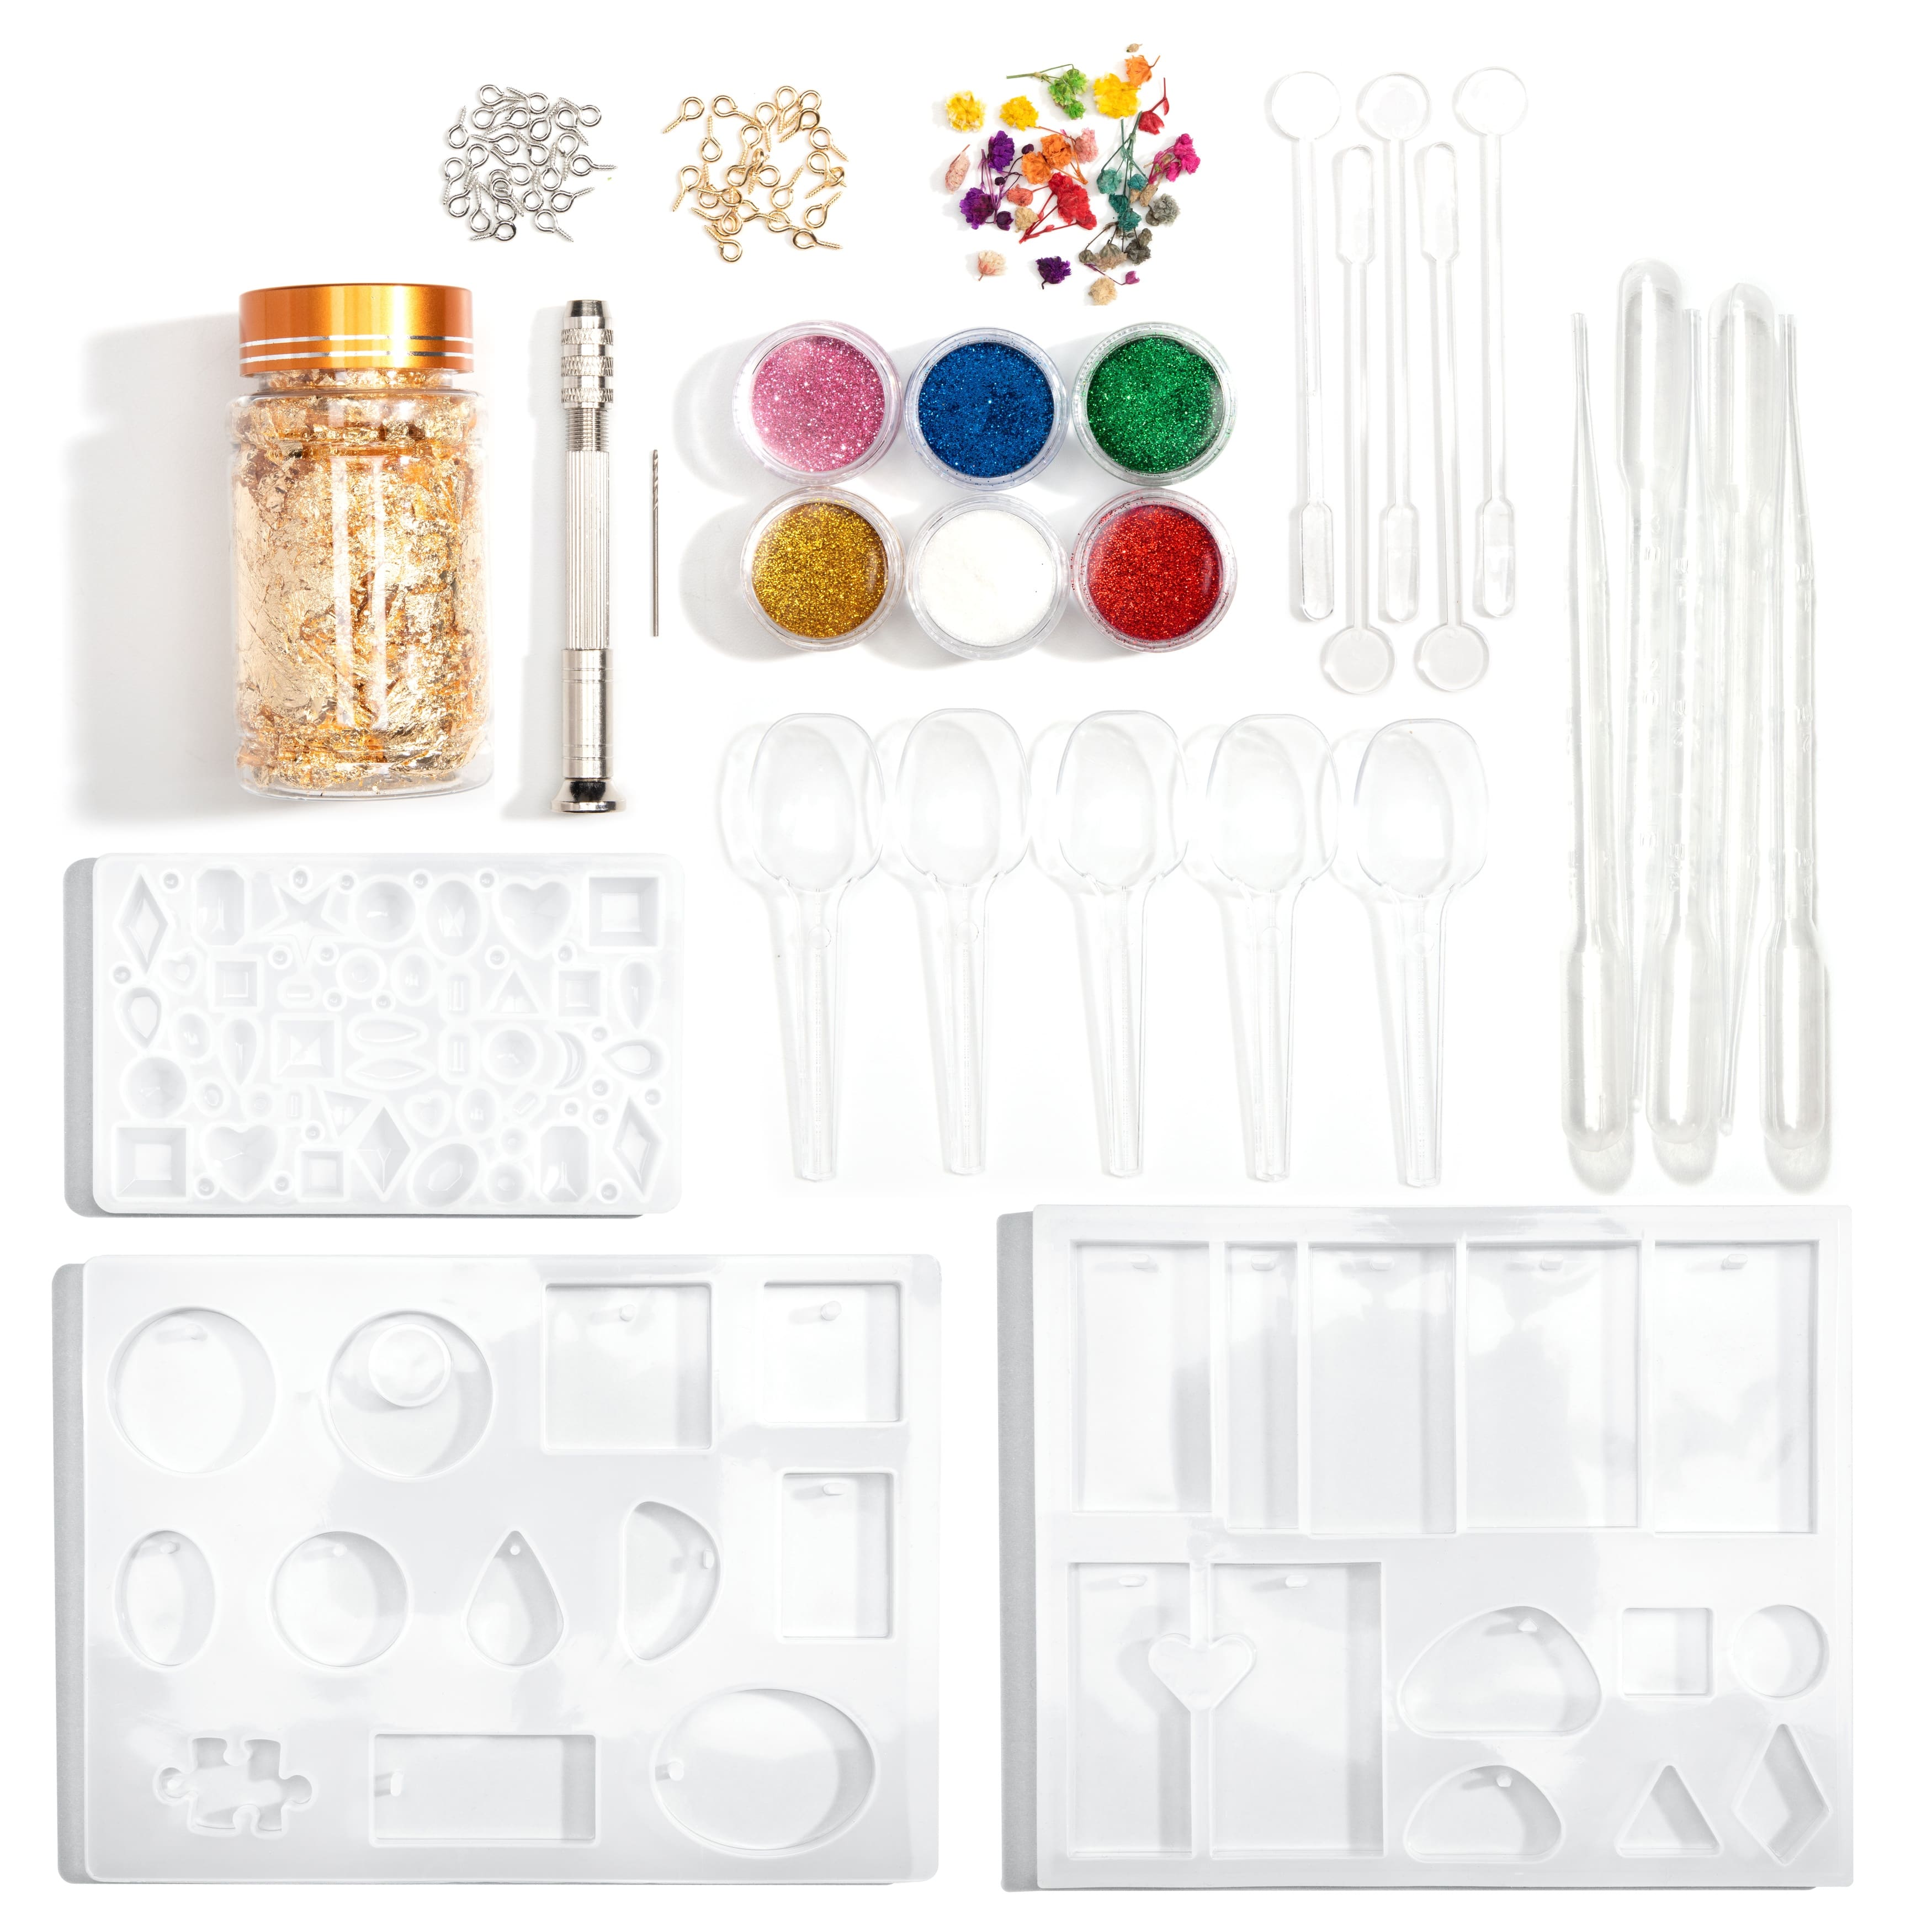 Ring Making Kit, 1718Pcs Jewelry Making Kit with 28 Colors Crystal